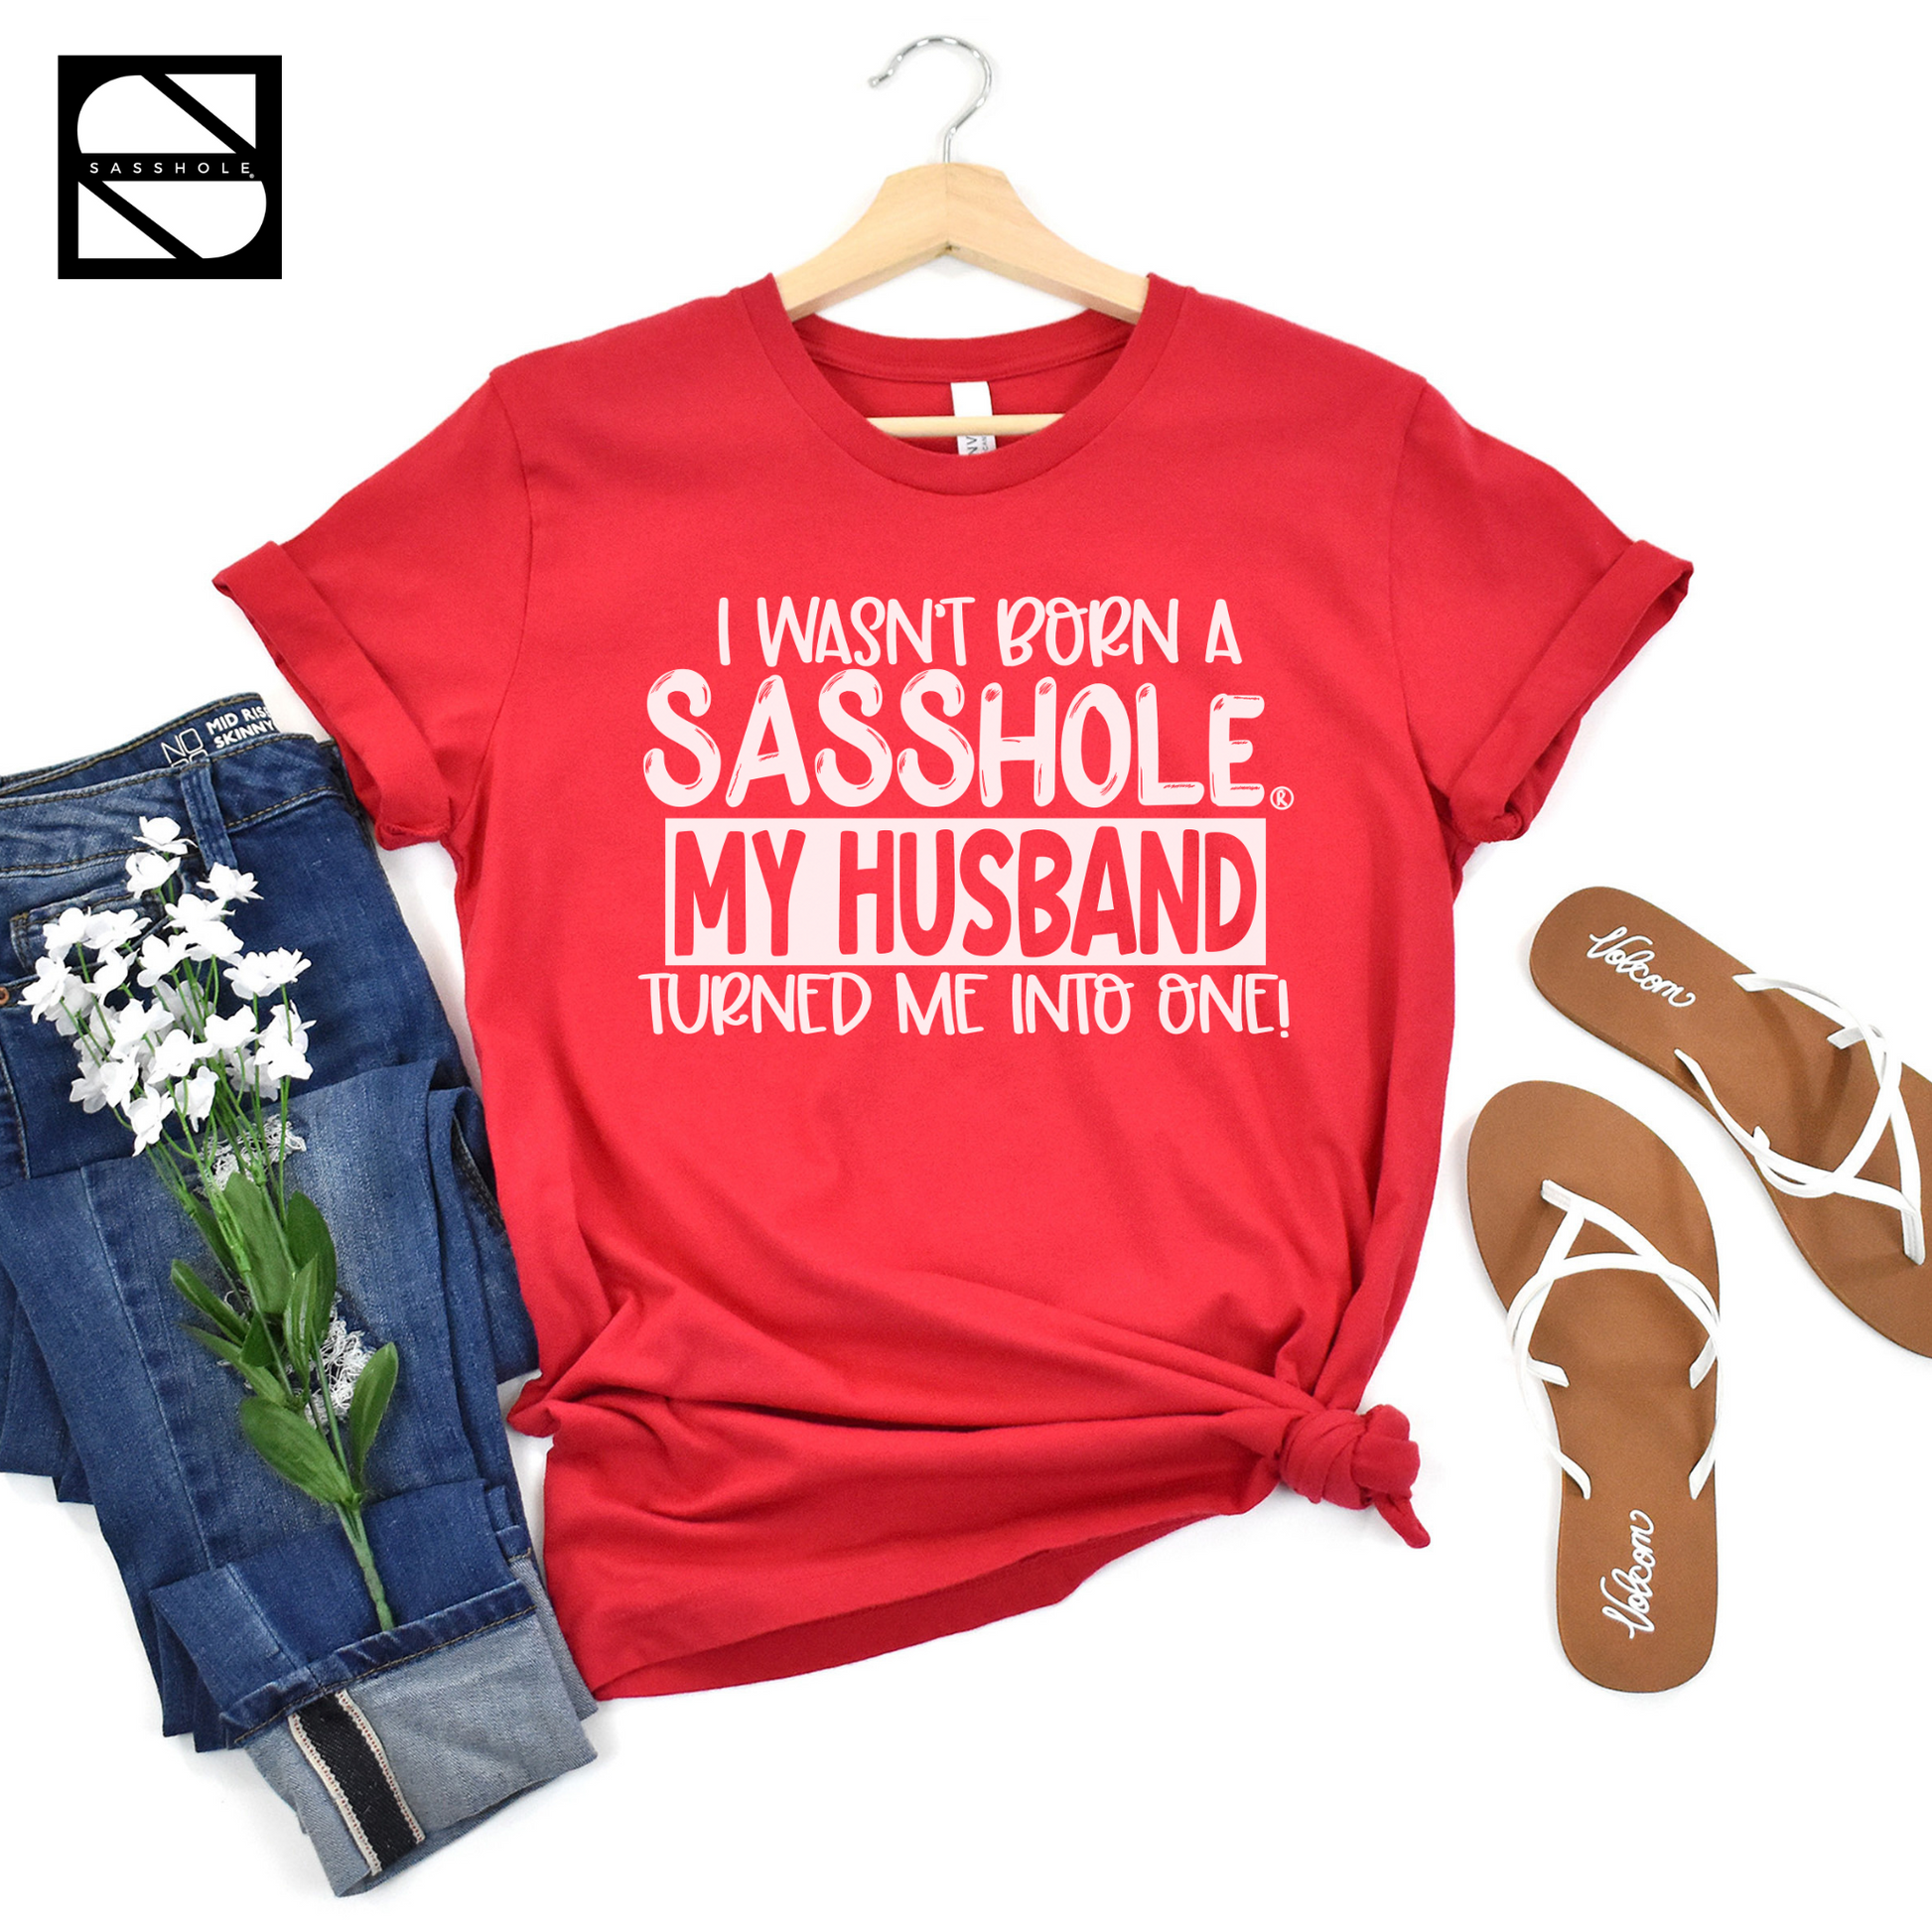 Ladies Funny Red Shirt